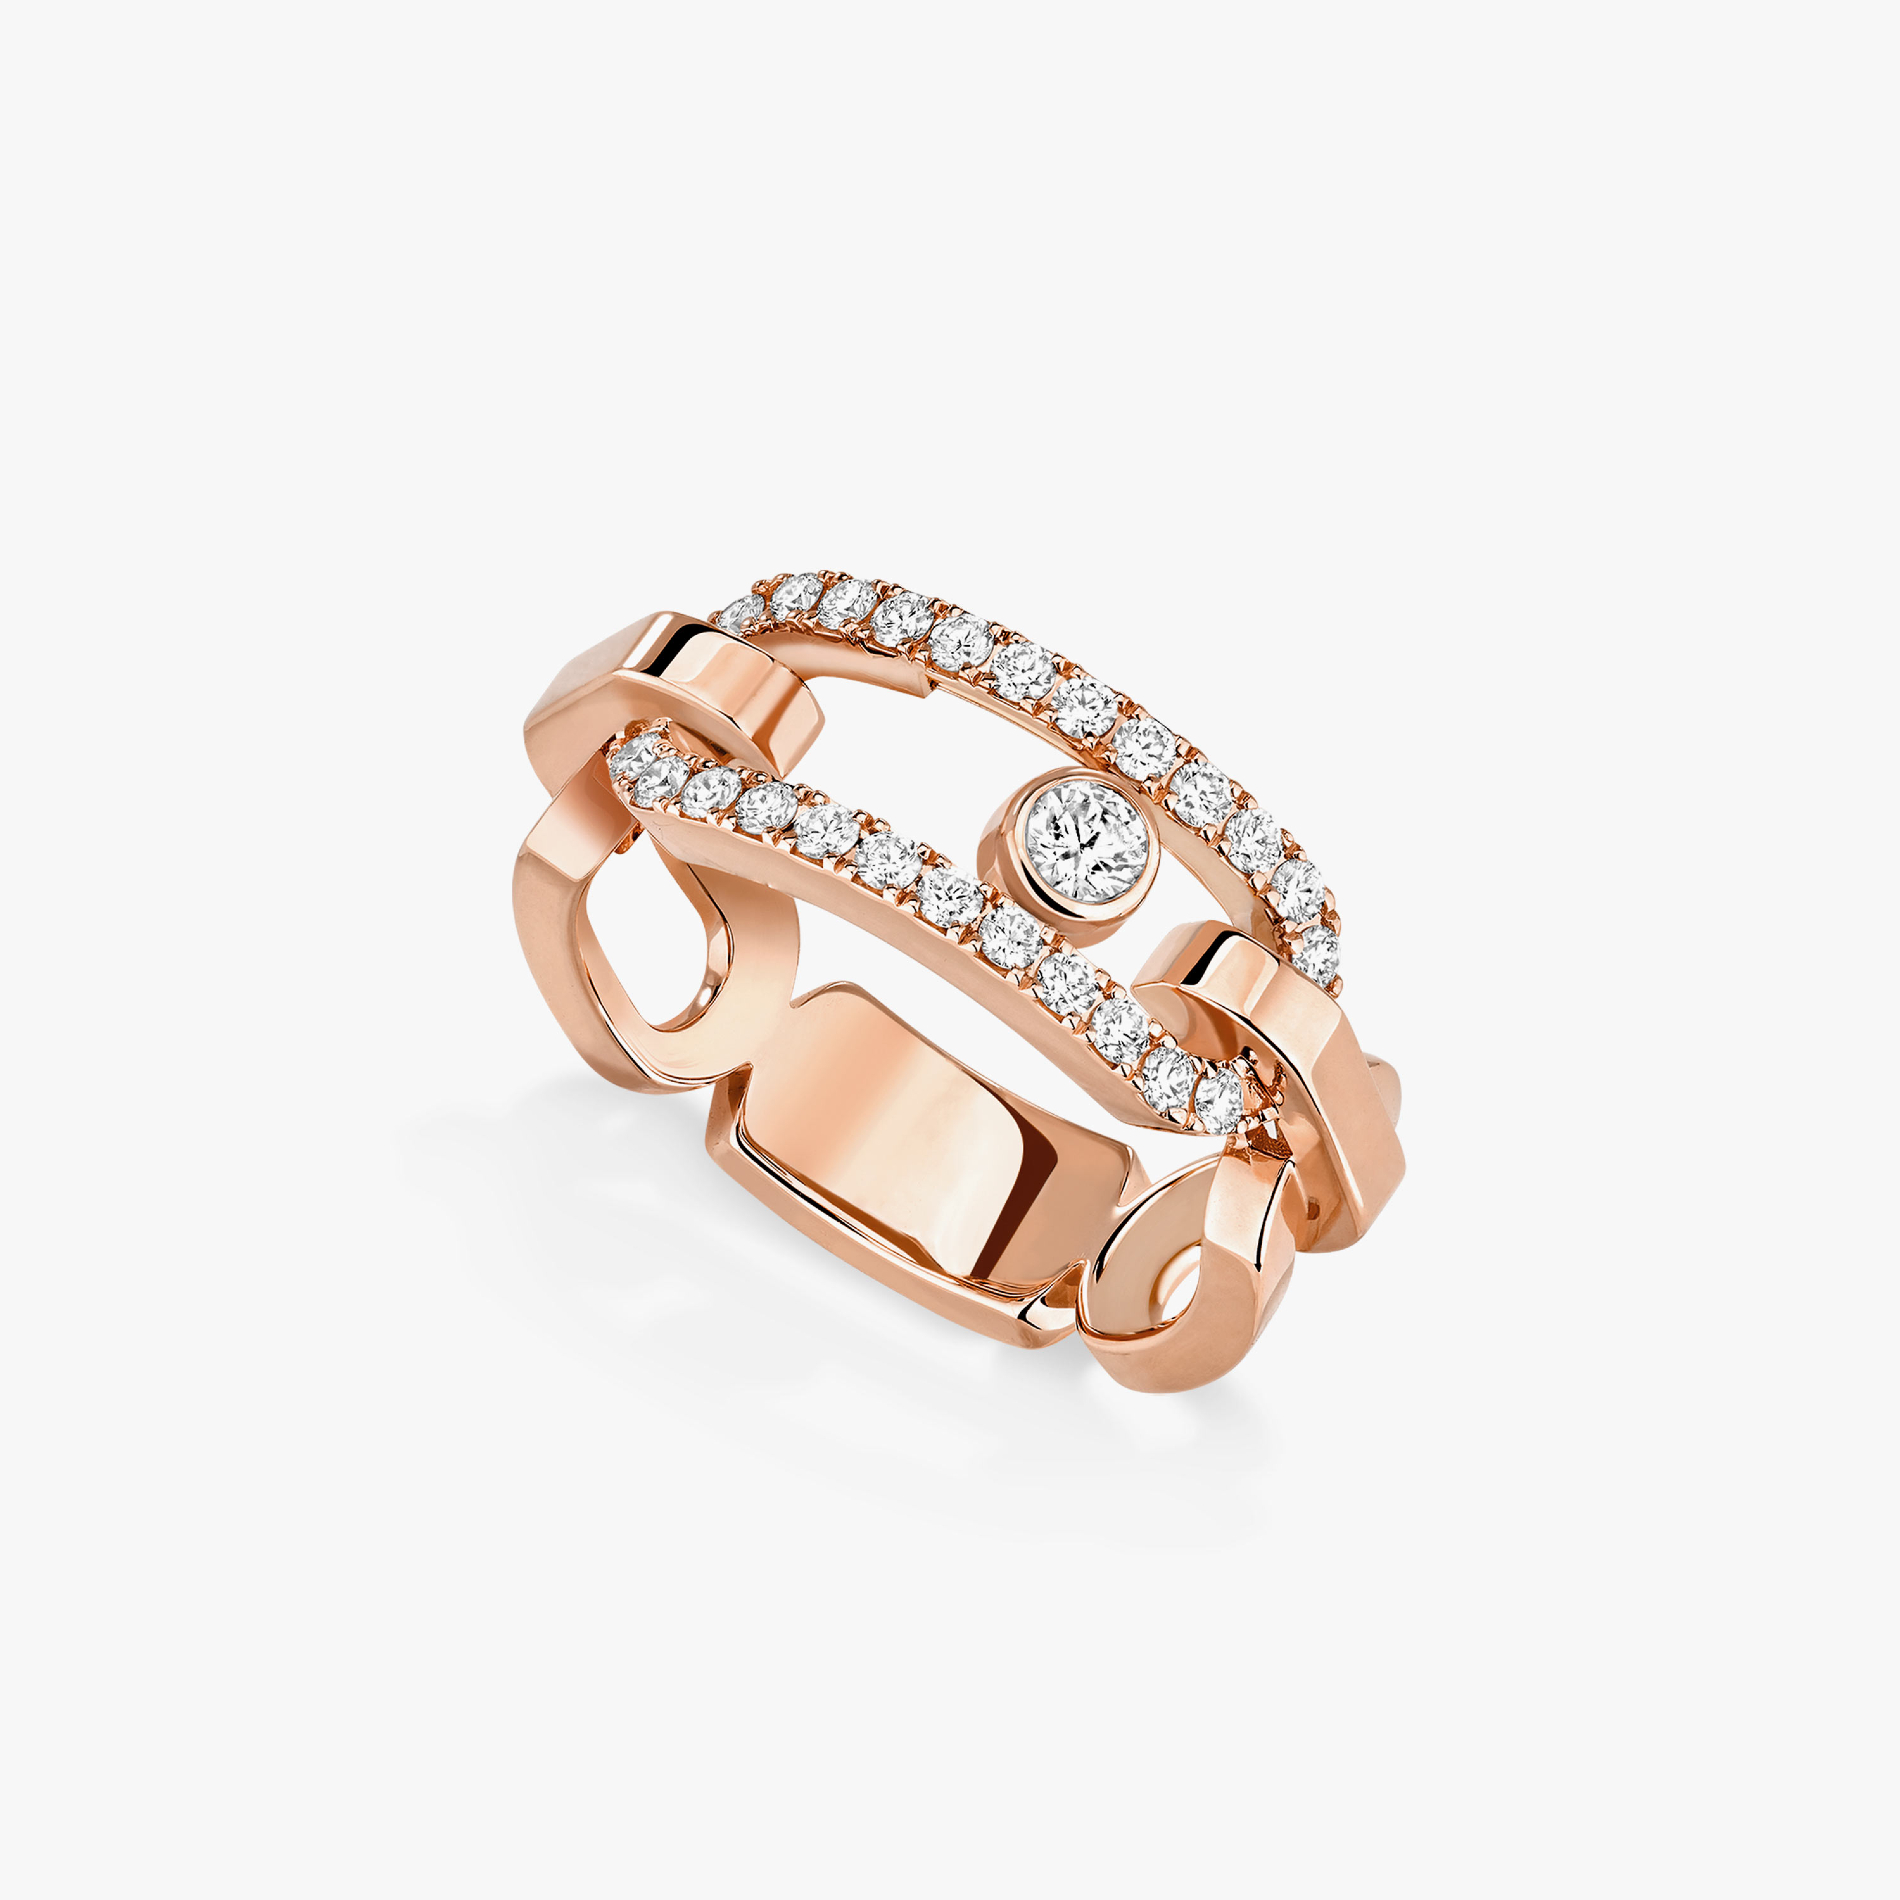 Ring For Her Pink Gold Diamond Move Link 12728-PG